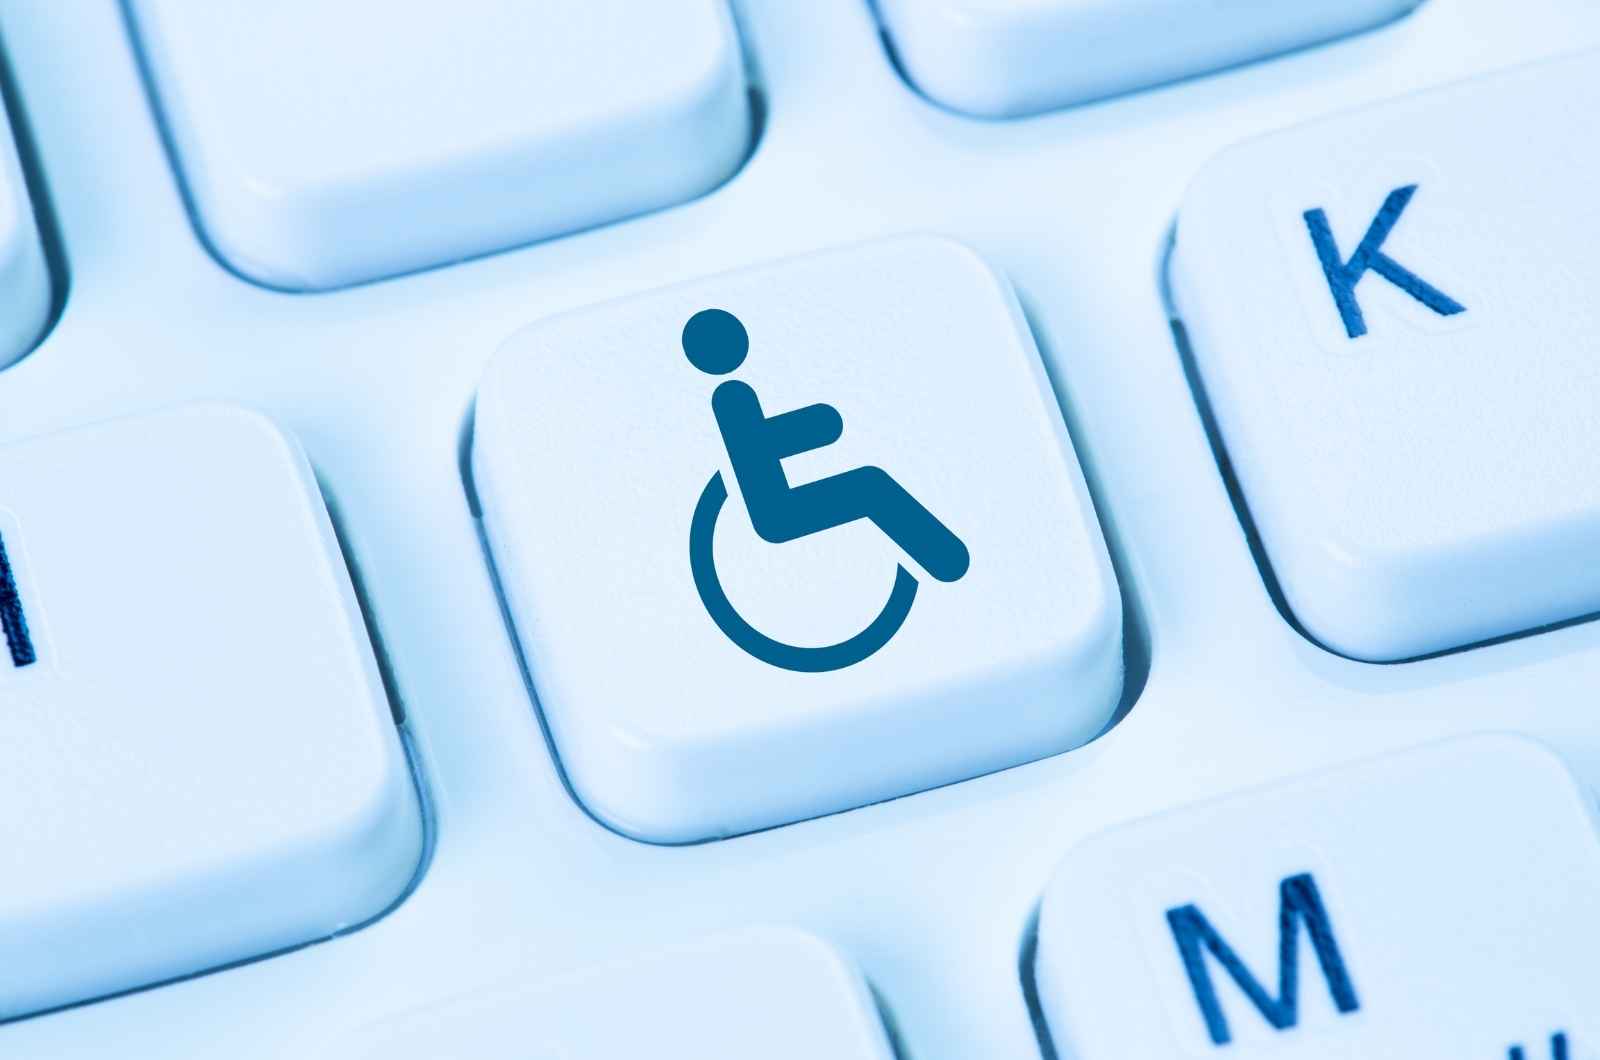 web accessible for people with disabilities